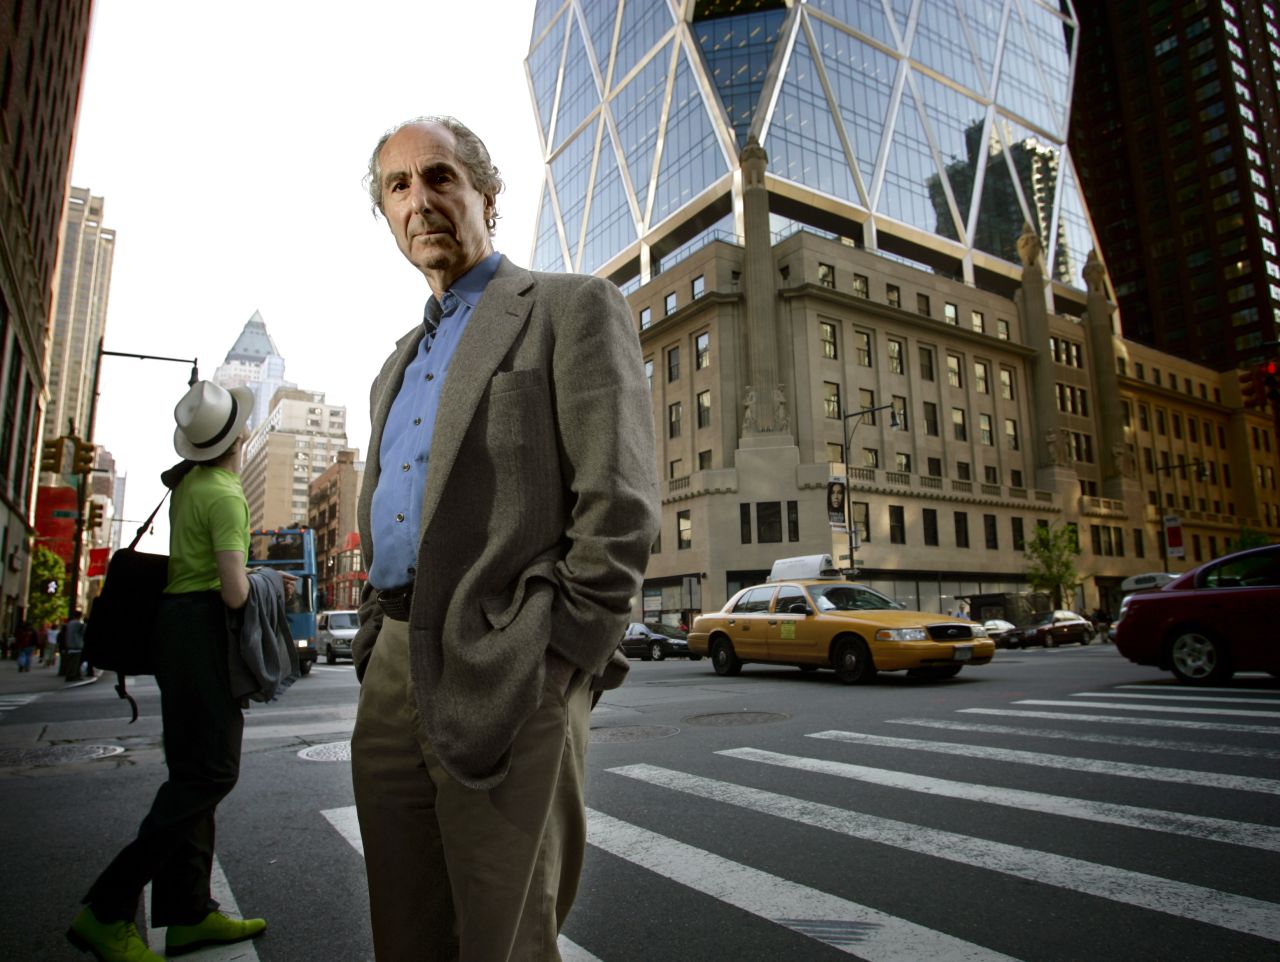 <a href="https://www.cnn.com/2018/05/23/us/philip-roth-dies/index.html" target="_blank">Philip Roth</a>, a Pulitzer Prize-winning novelist, died May 22 at the age of 85. Roth was one of America's most prolific and controversial 20th-century novelists, with a career that spanned decades and more than two dozen books.